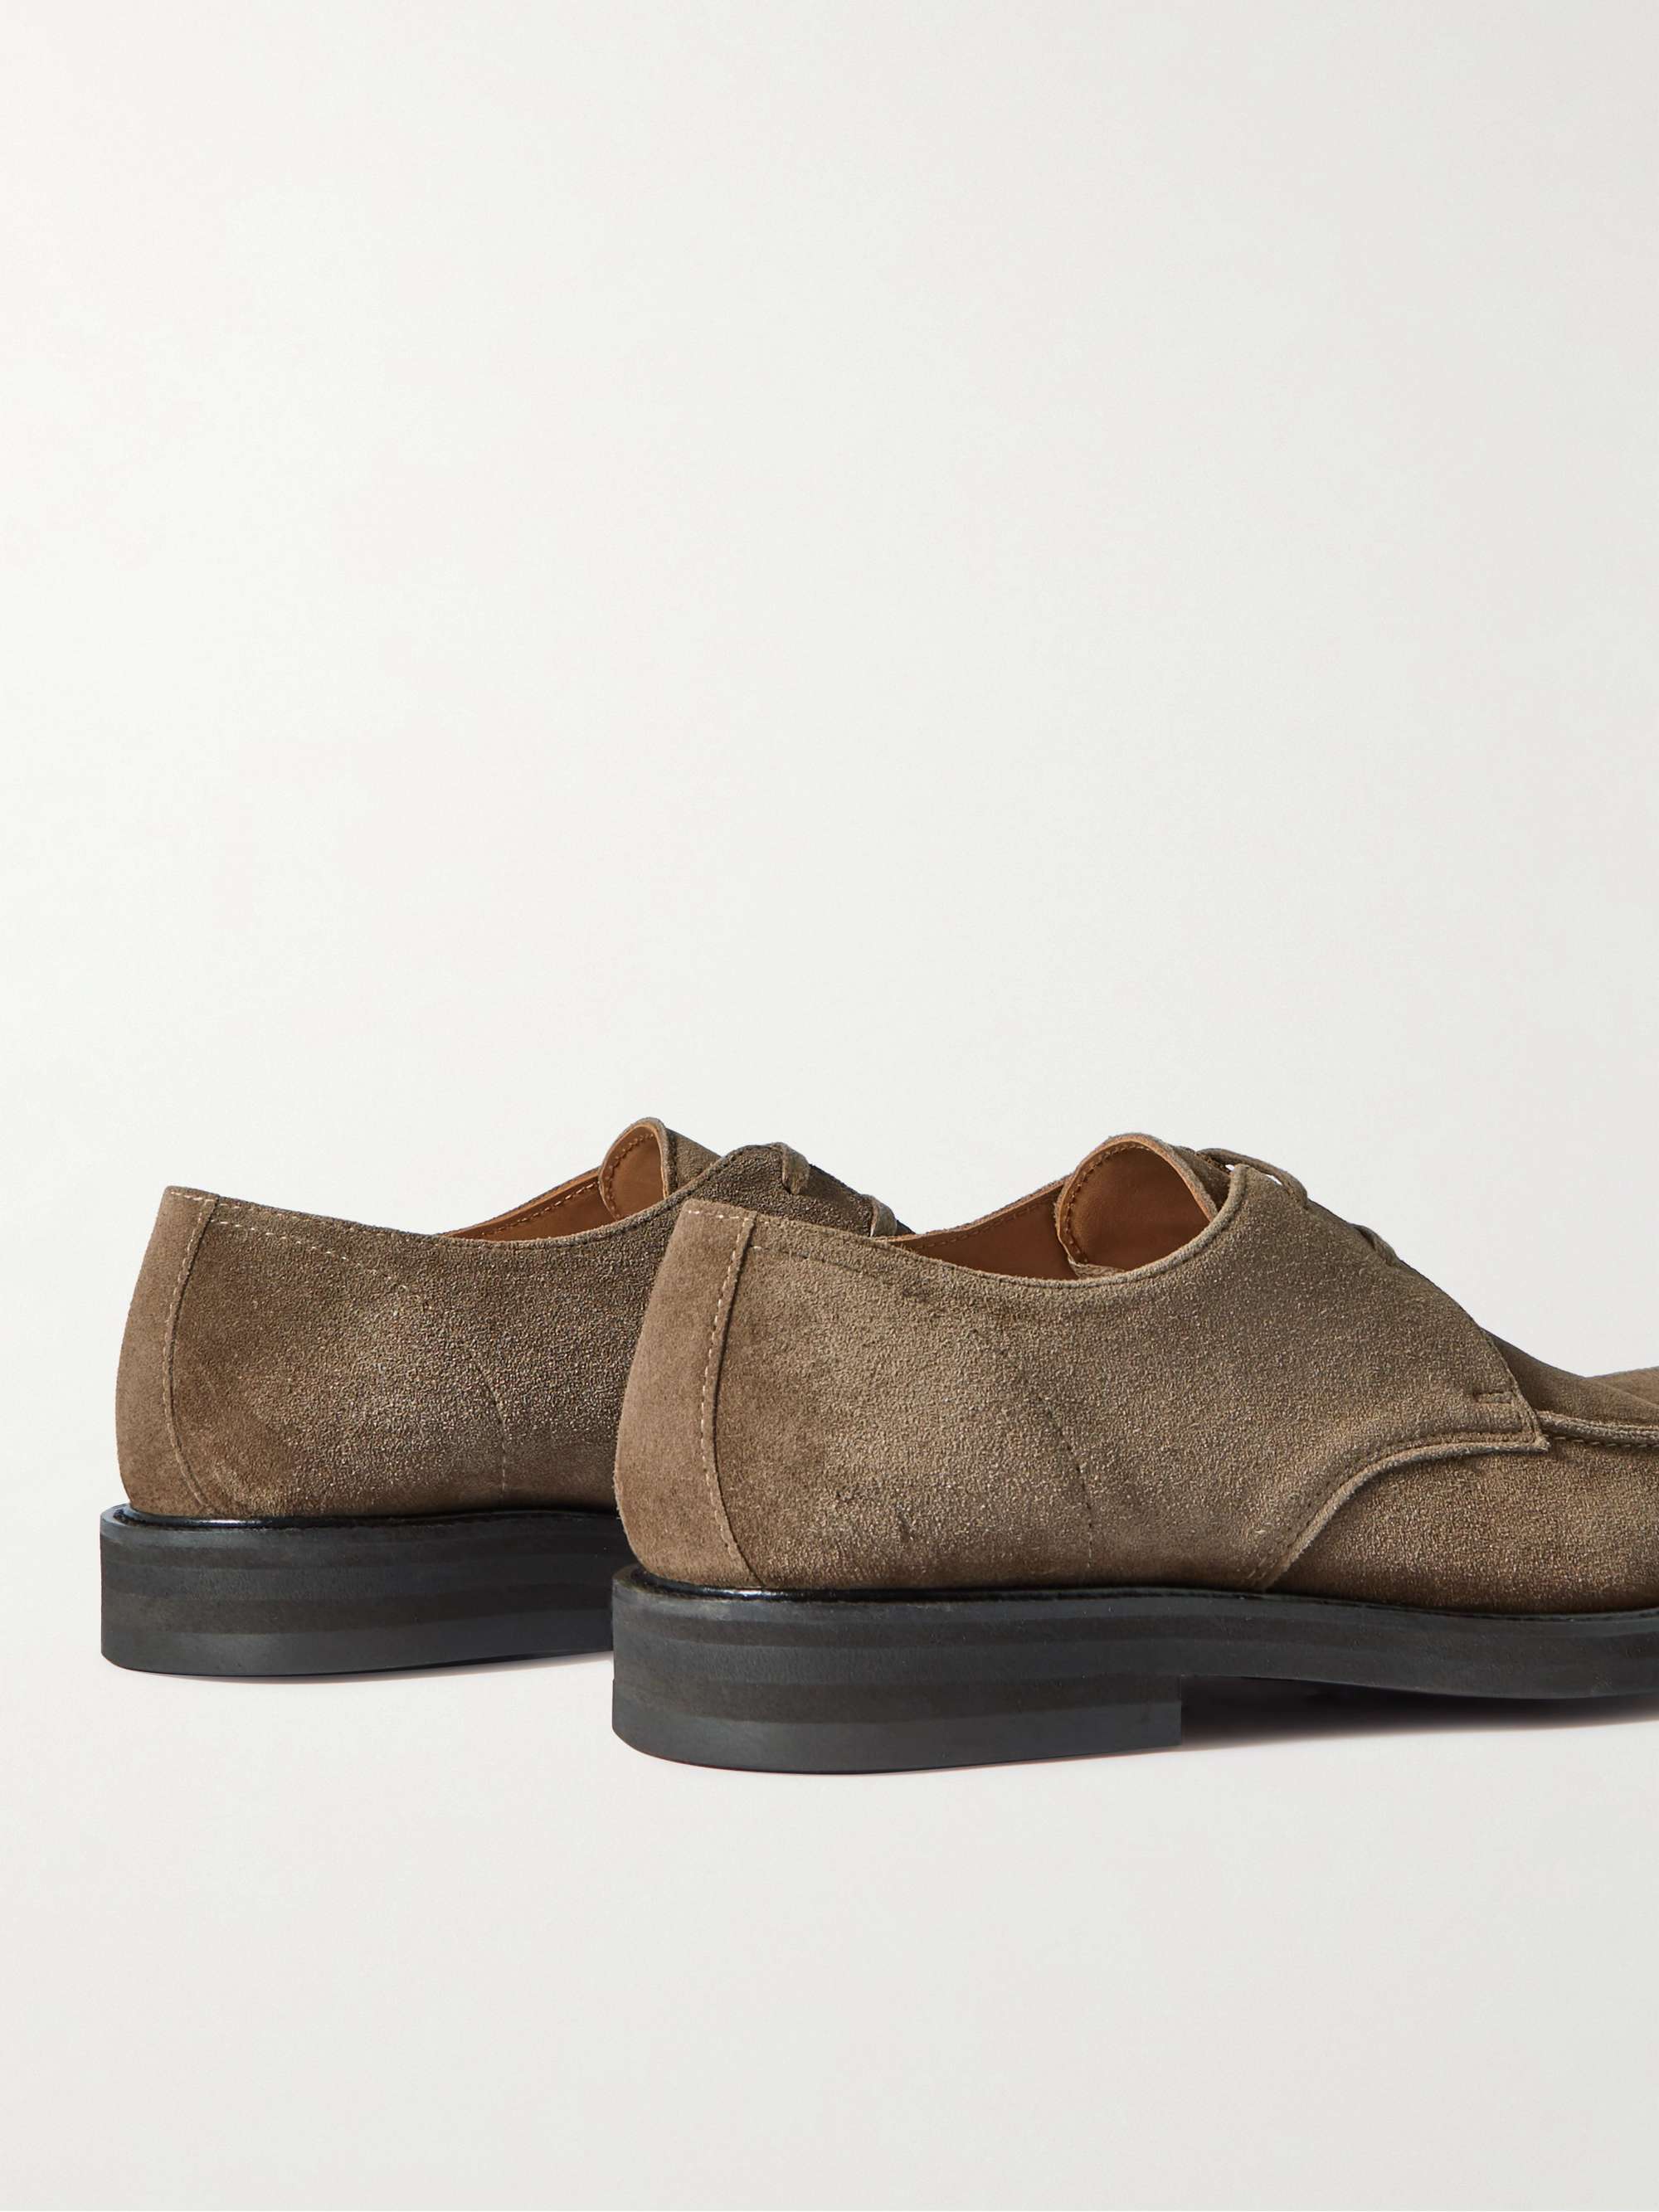 MR P. Andrew Split-Toe Regenerated Suede by evolo® Derby Shoes